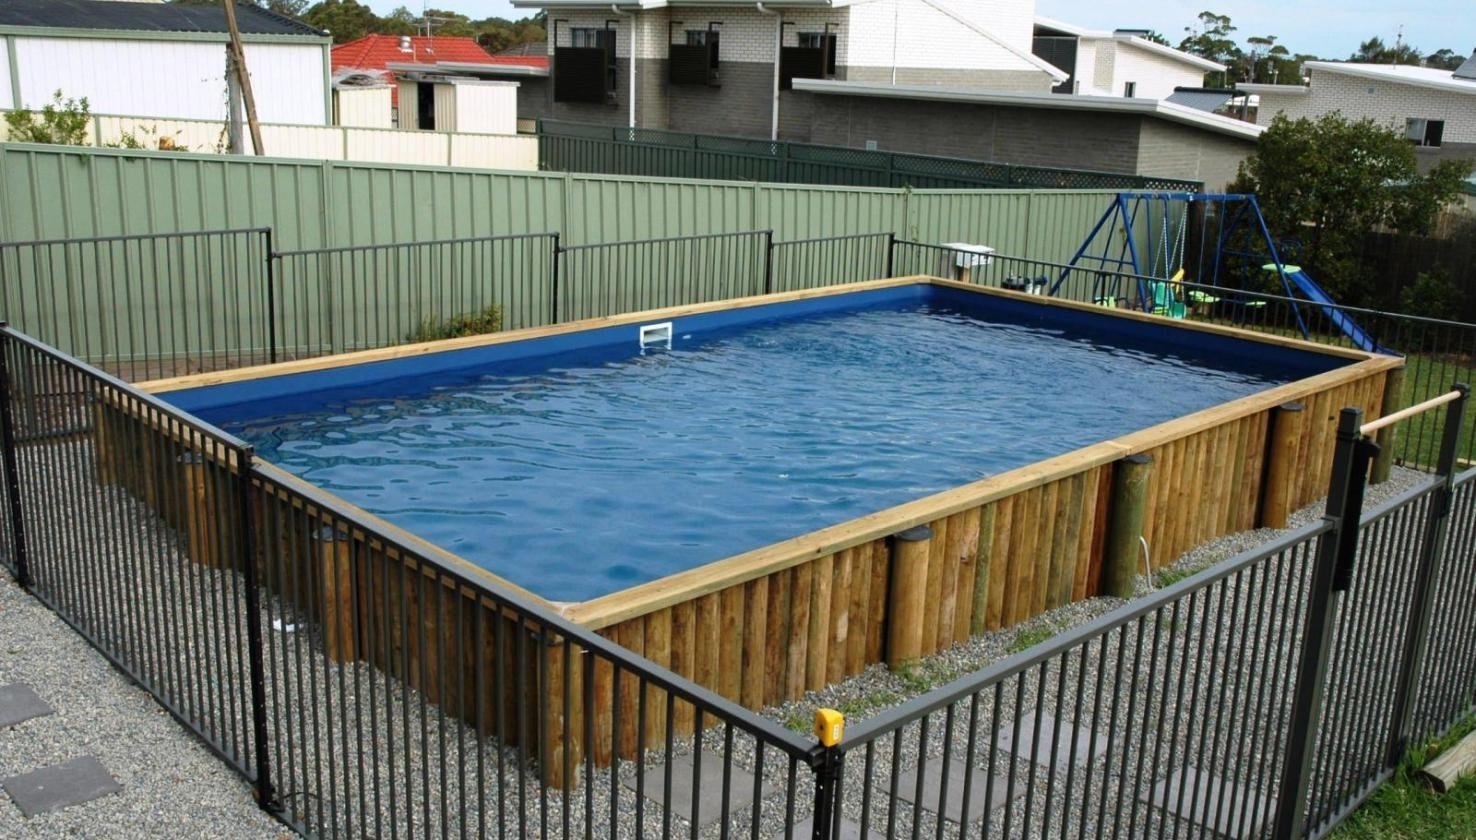 10 Unique Above Ground Pool Fencing Ideas above ground pool fence for wish housestclair 2022